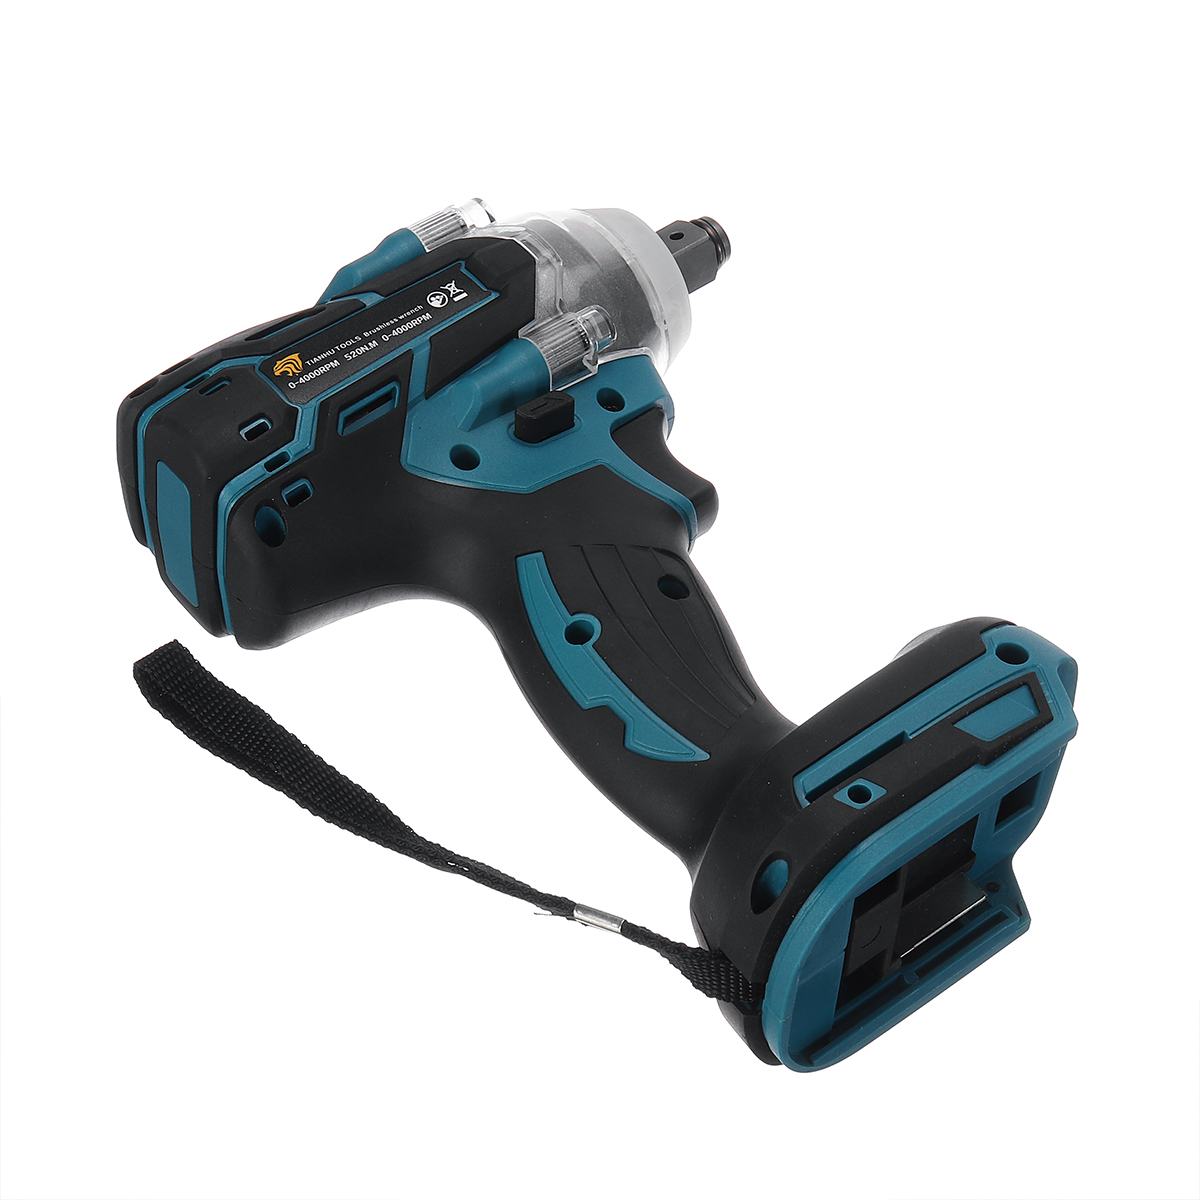 18 V Electric Impact Wrench